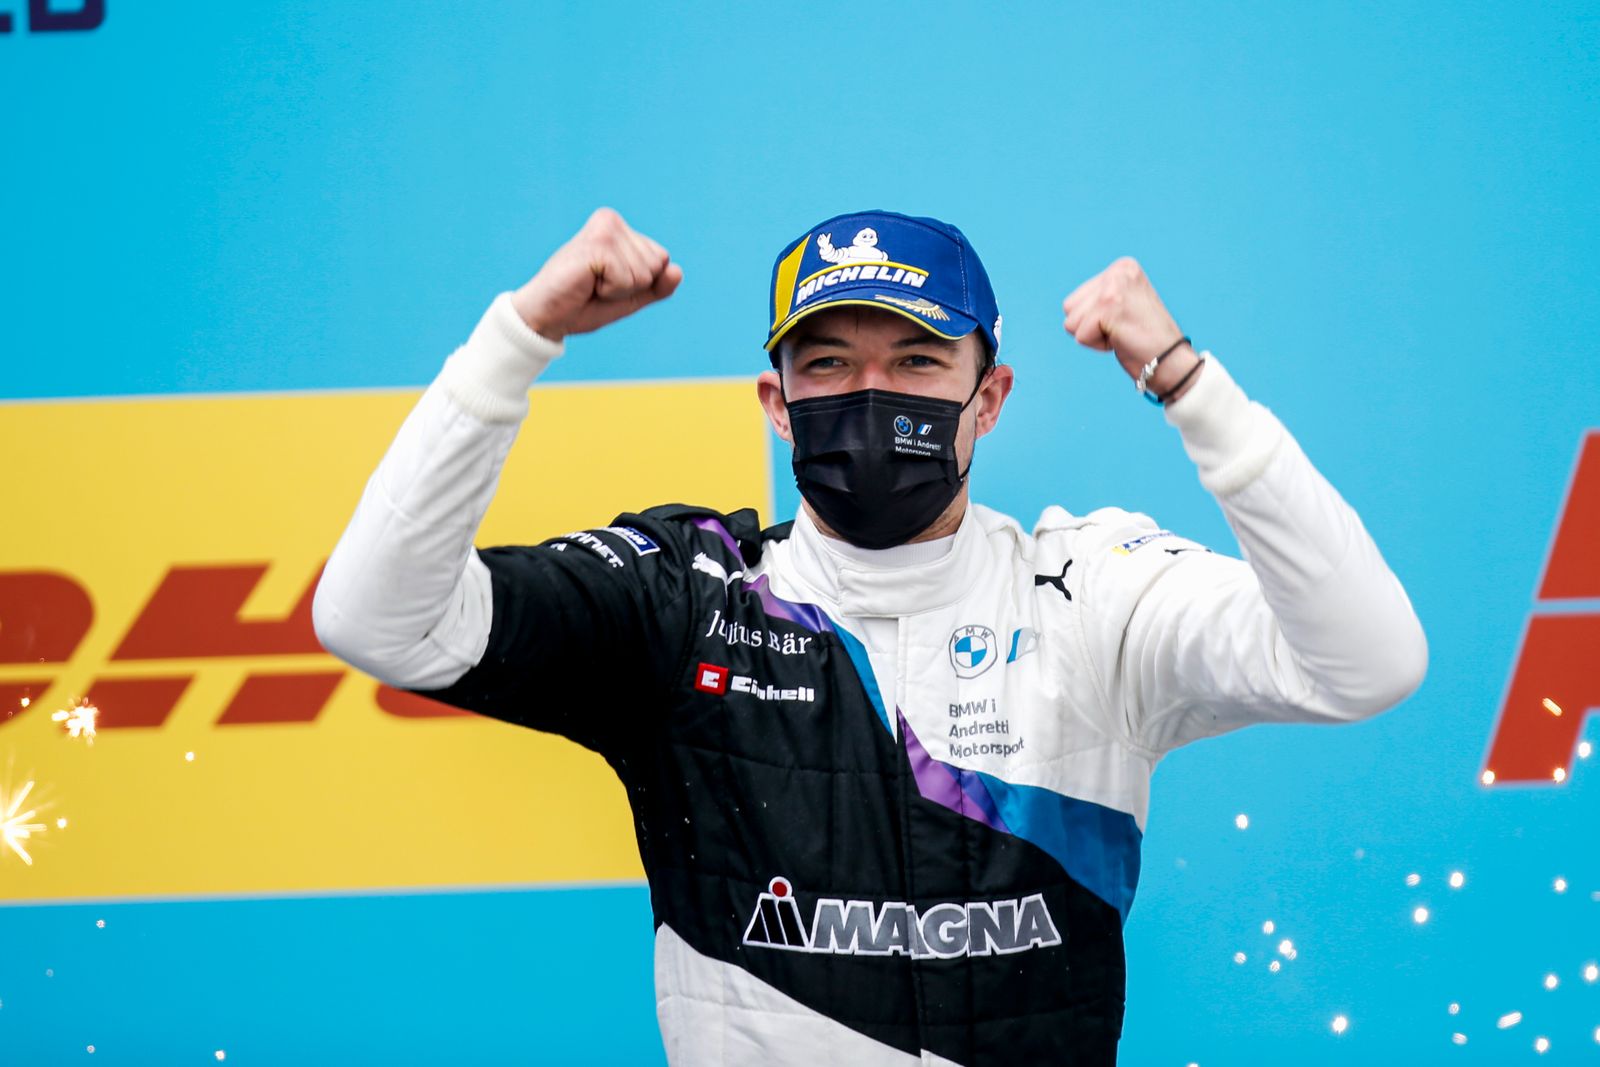 JAKE DENNIS Dominates on way to maiden FORMULA E victory in VALENCIA